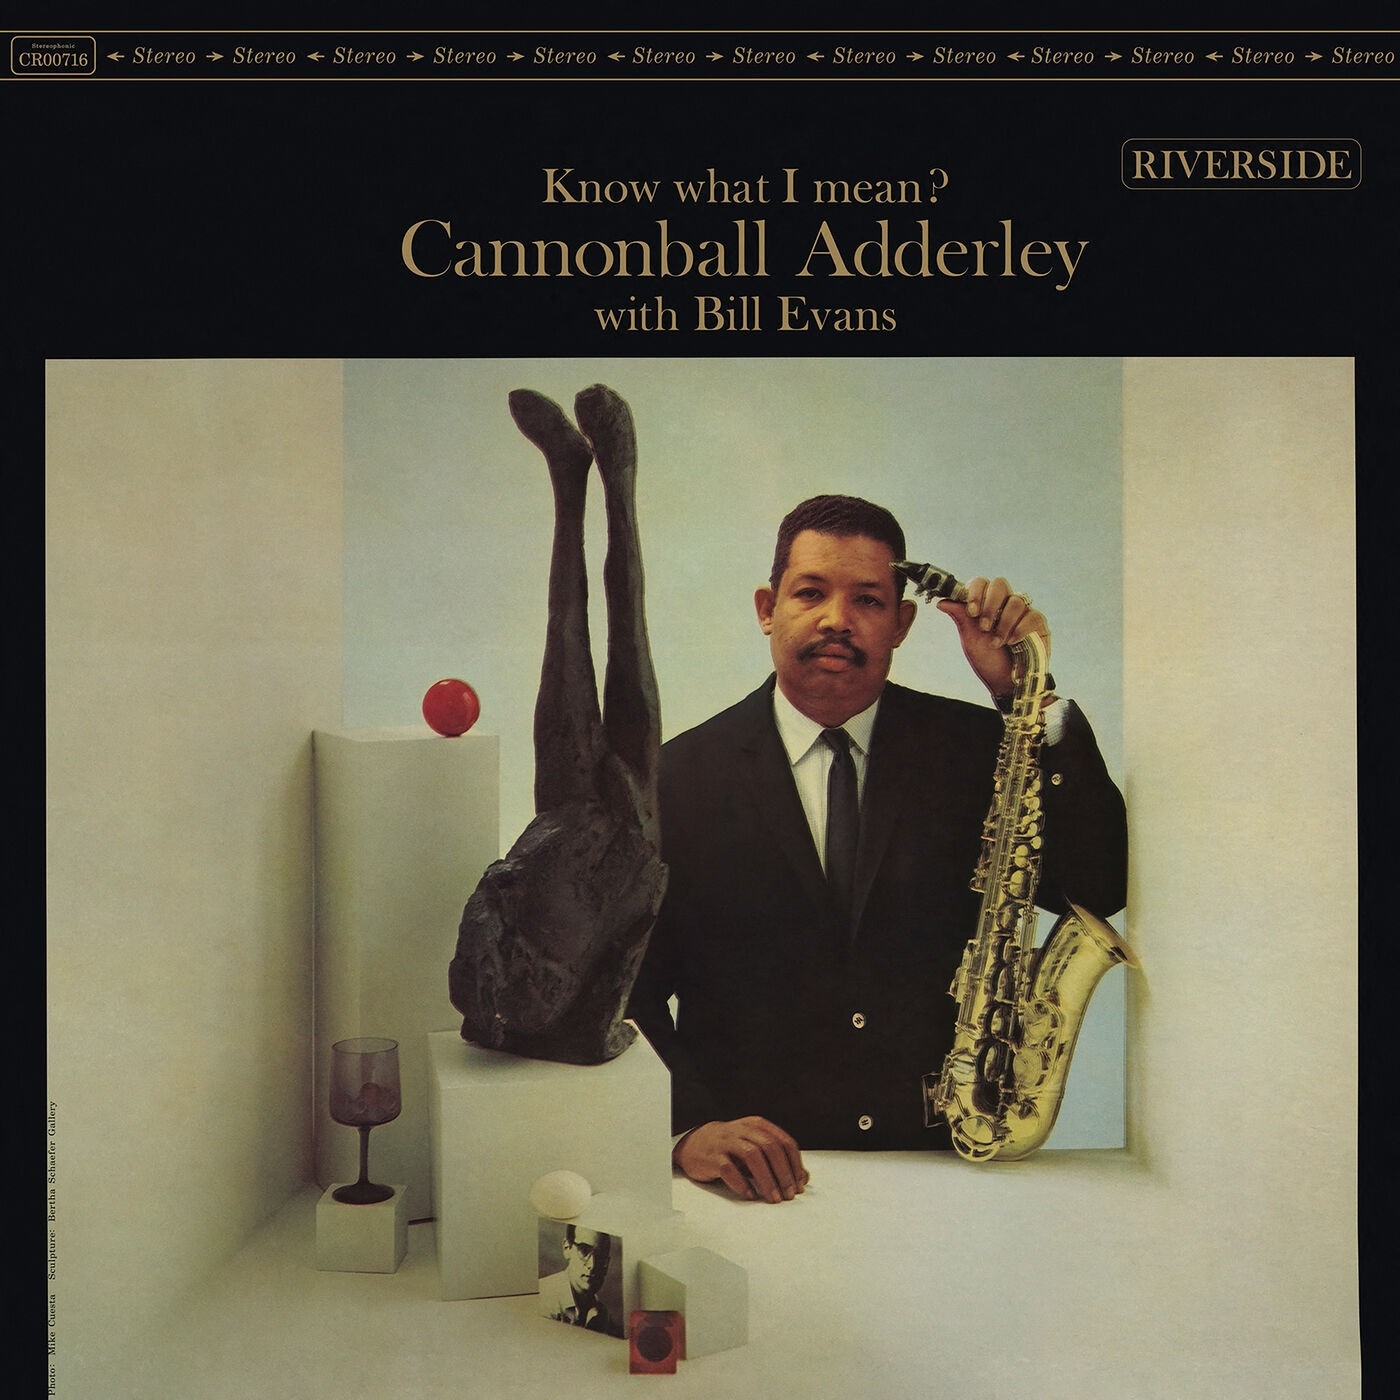 Cannonball Adderley, Bill Evans - Know What I Mean? (Original Jazz Classics Series / Remastered) (1960/2024) [FLAC 24bit/192kHz] Download